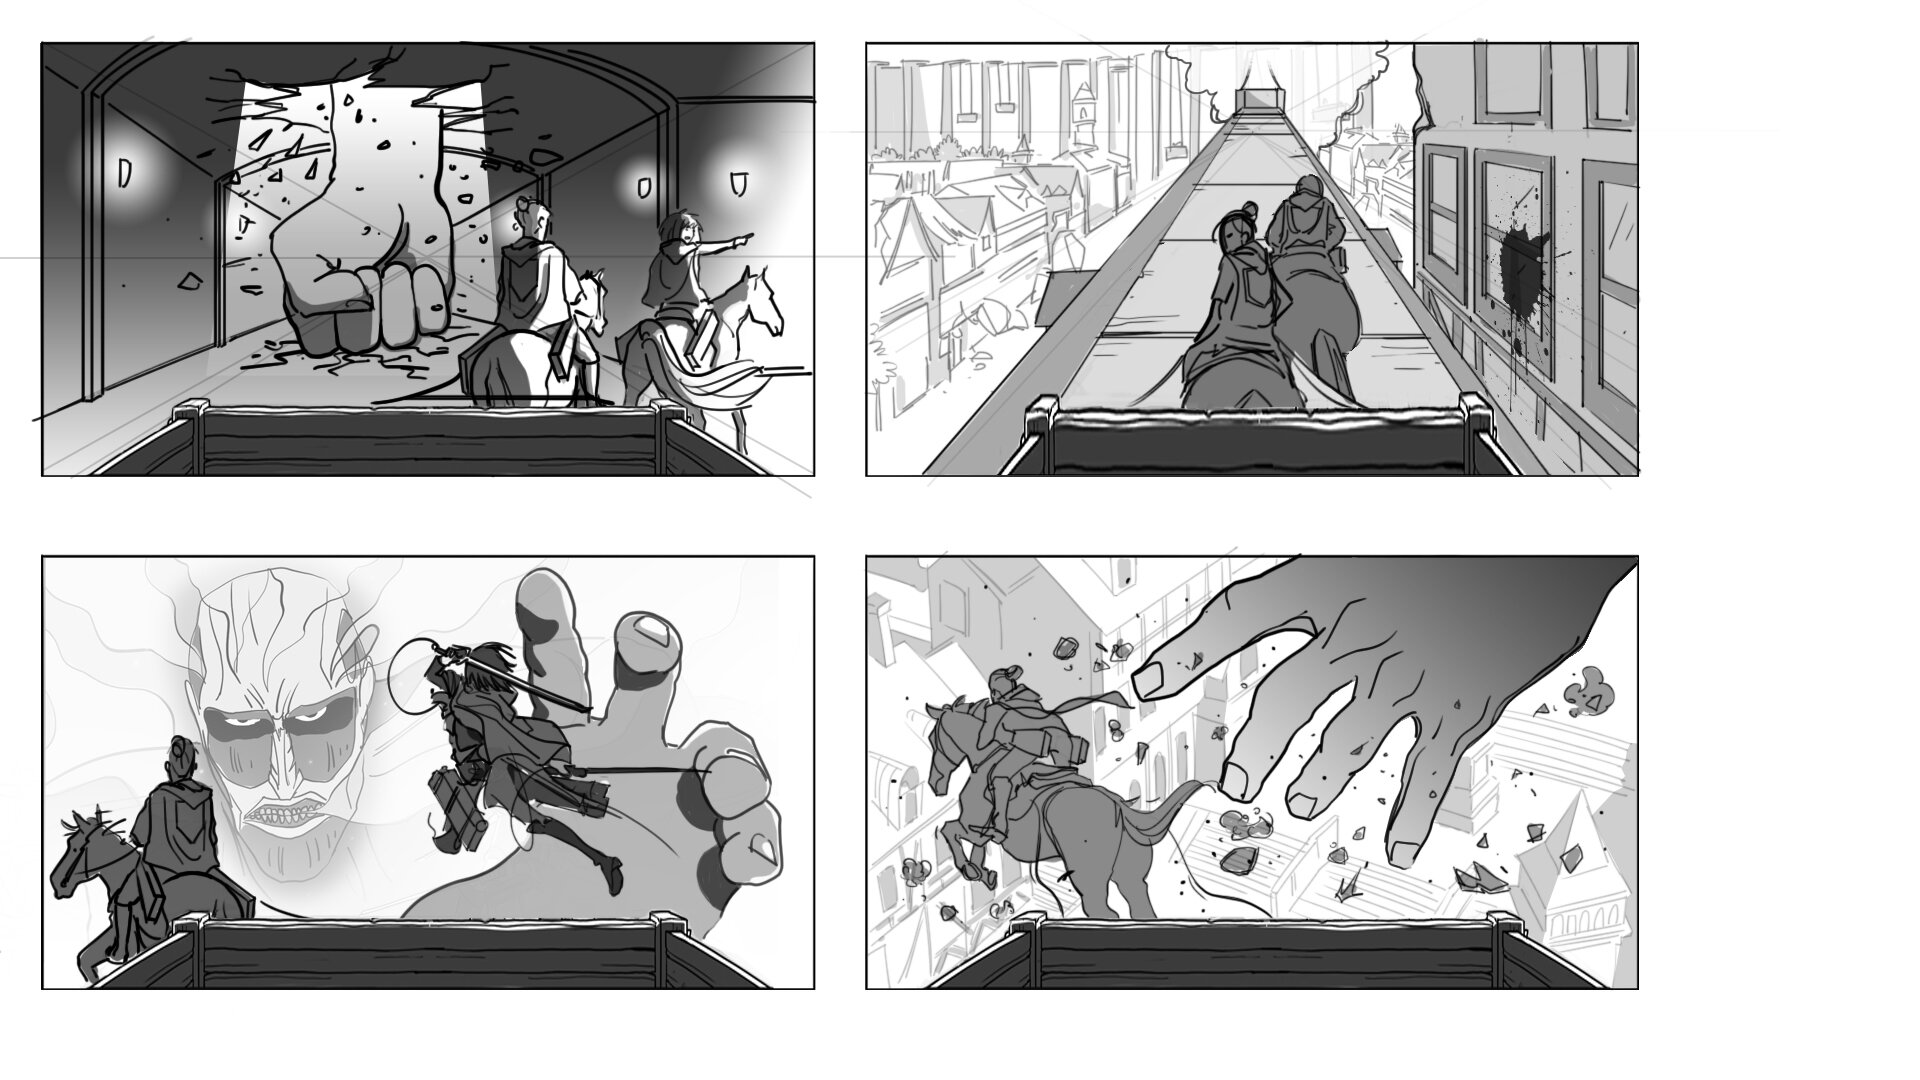  Storyboards for key moments in the VR animation 